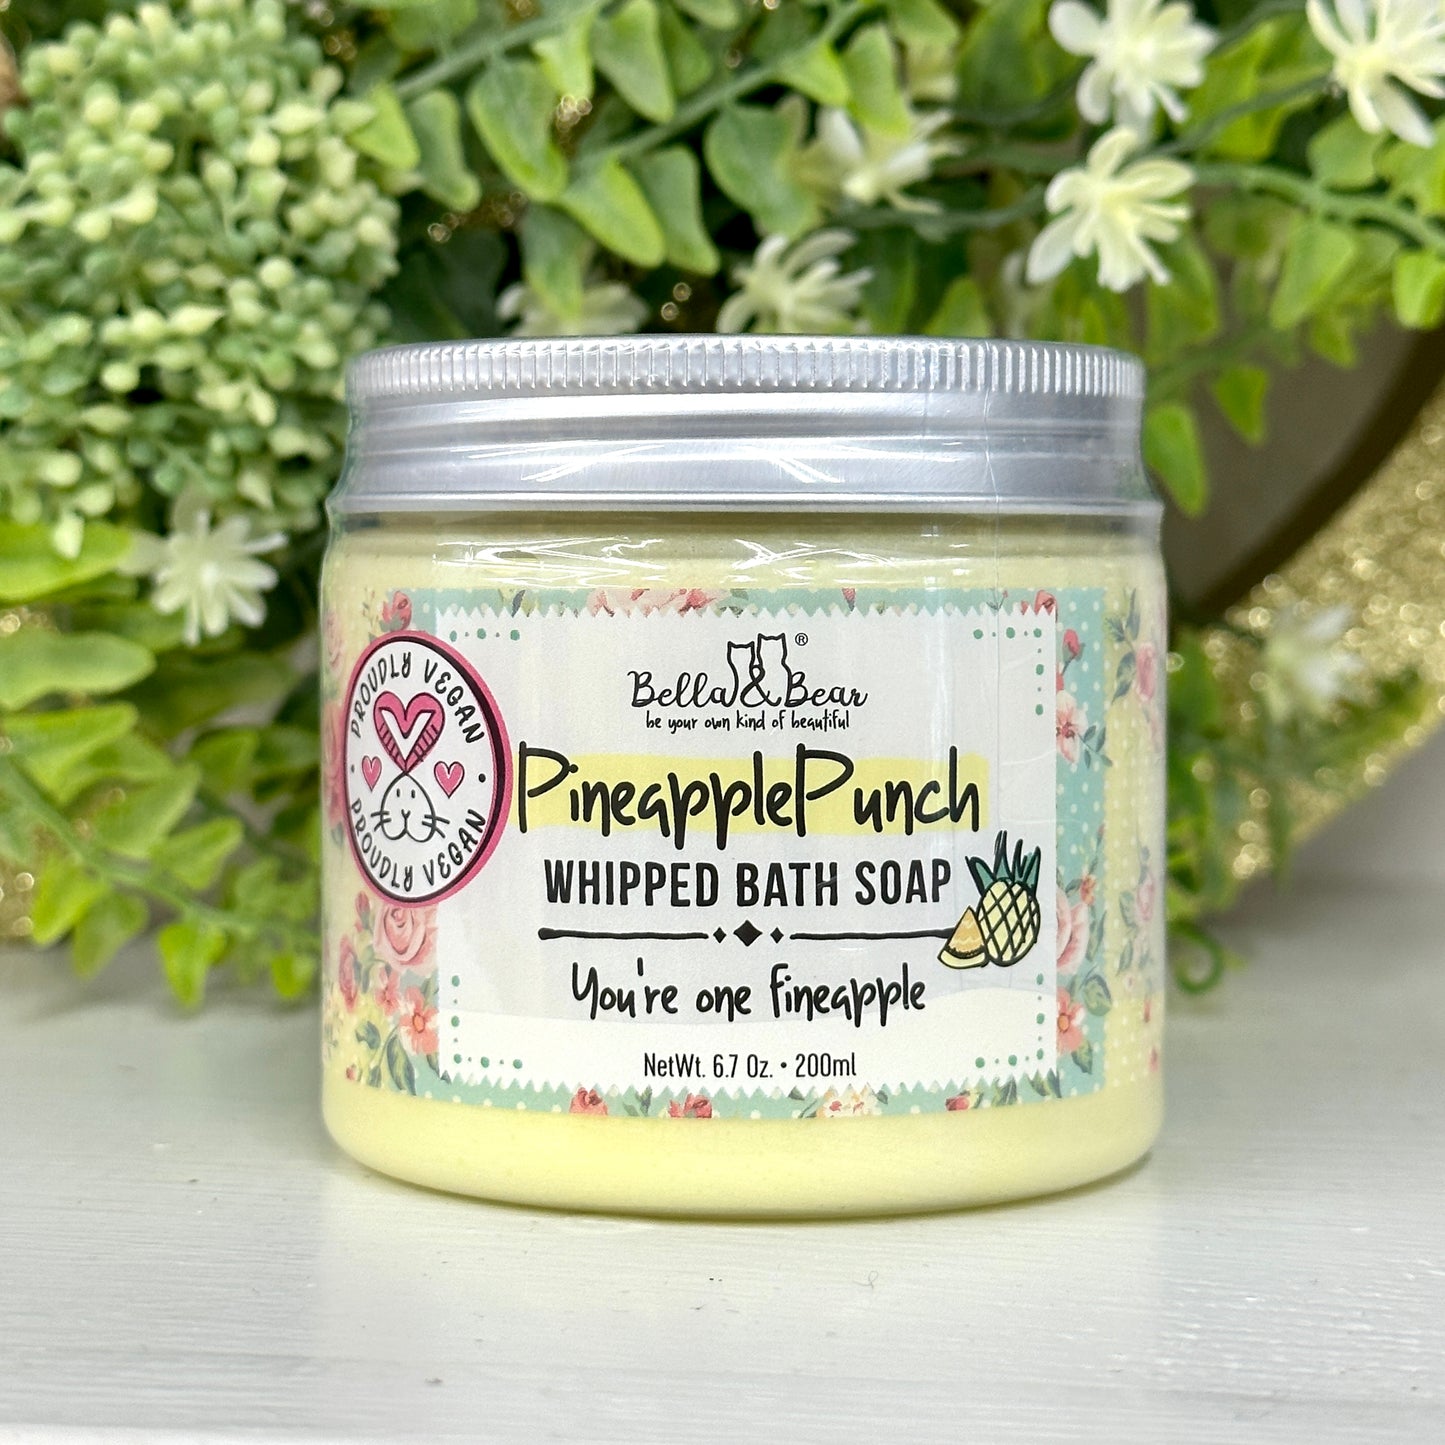 PINEAPPLE PUNCH WHIPPED BATH SOAP